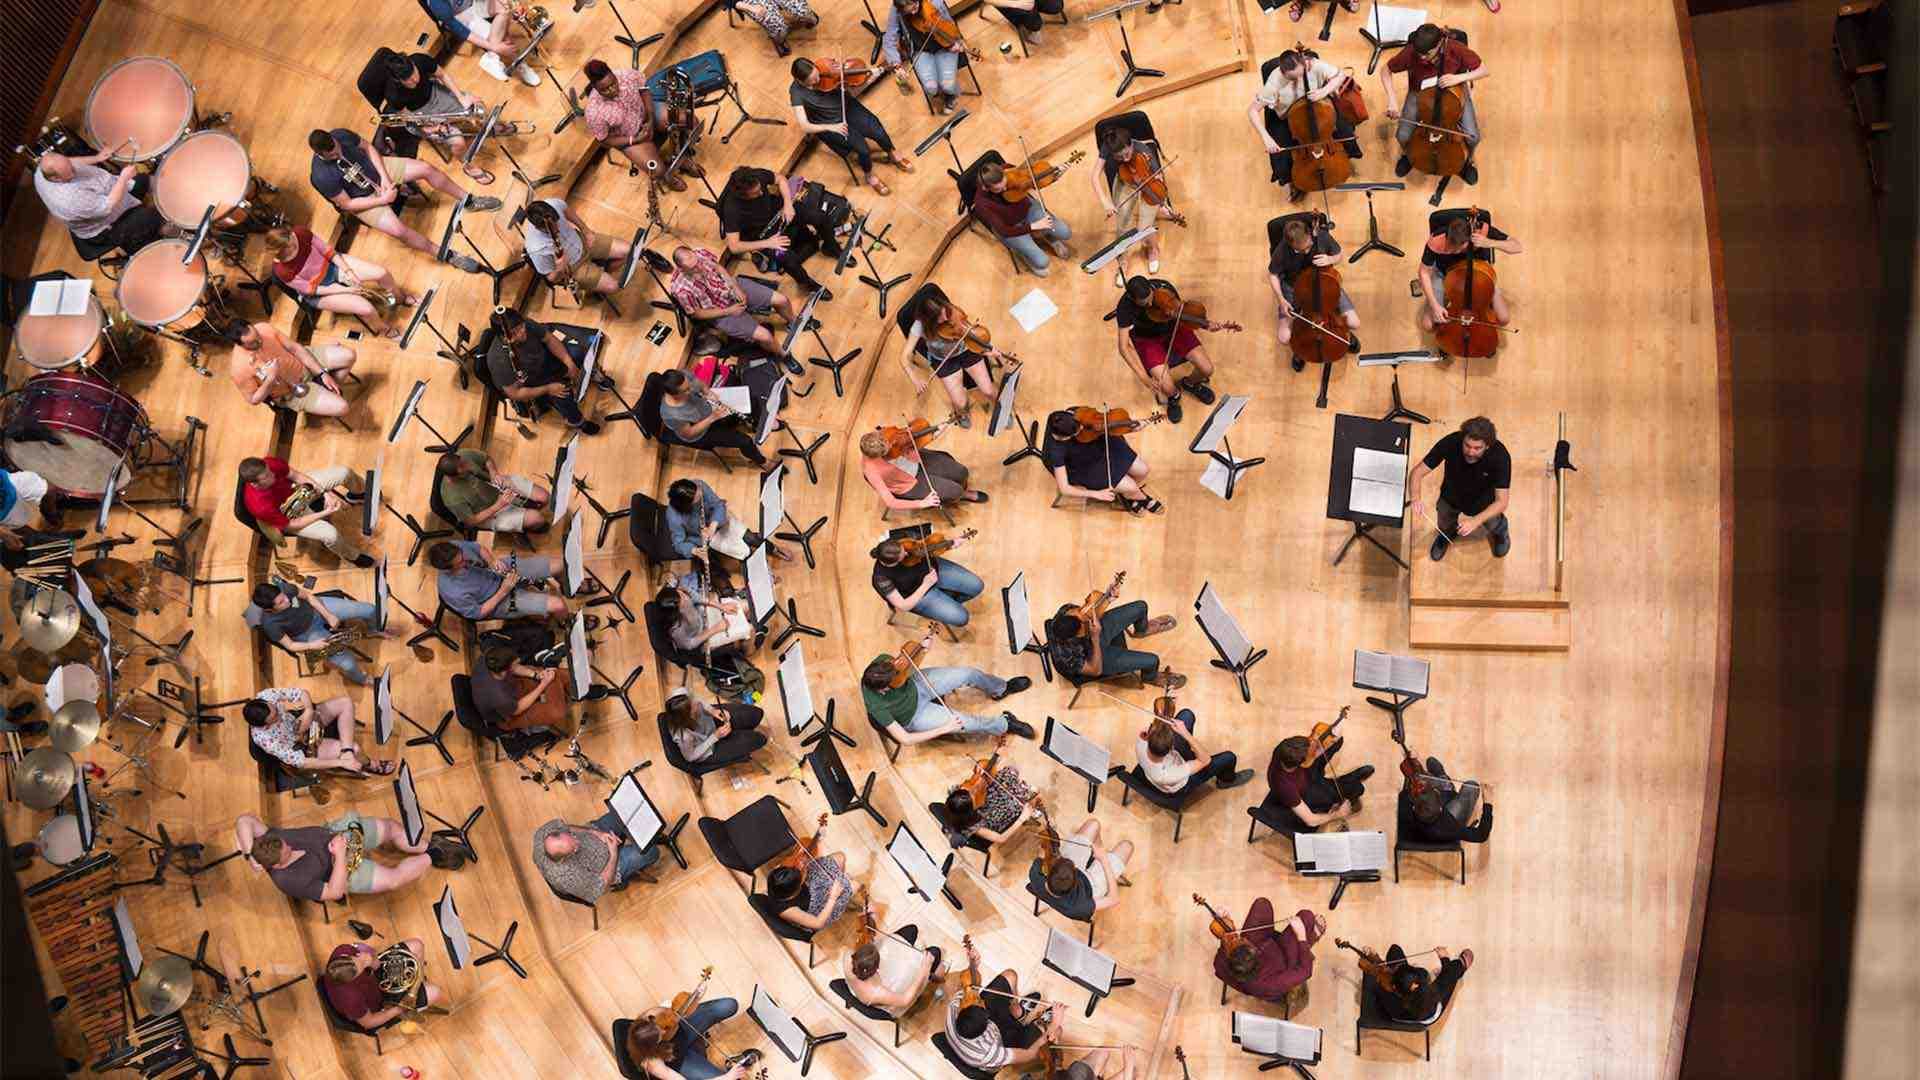 Overhead view of orchestra